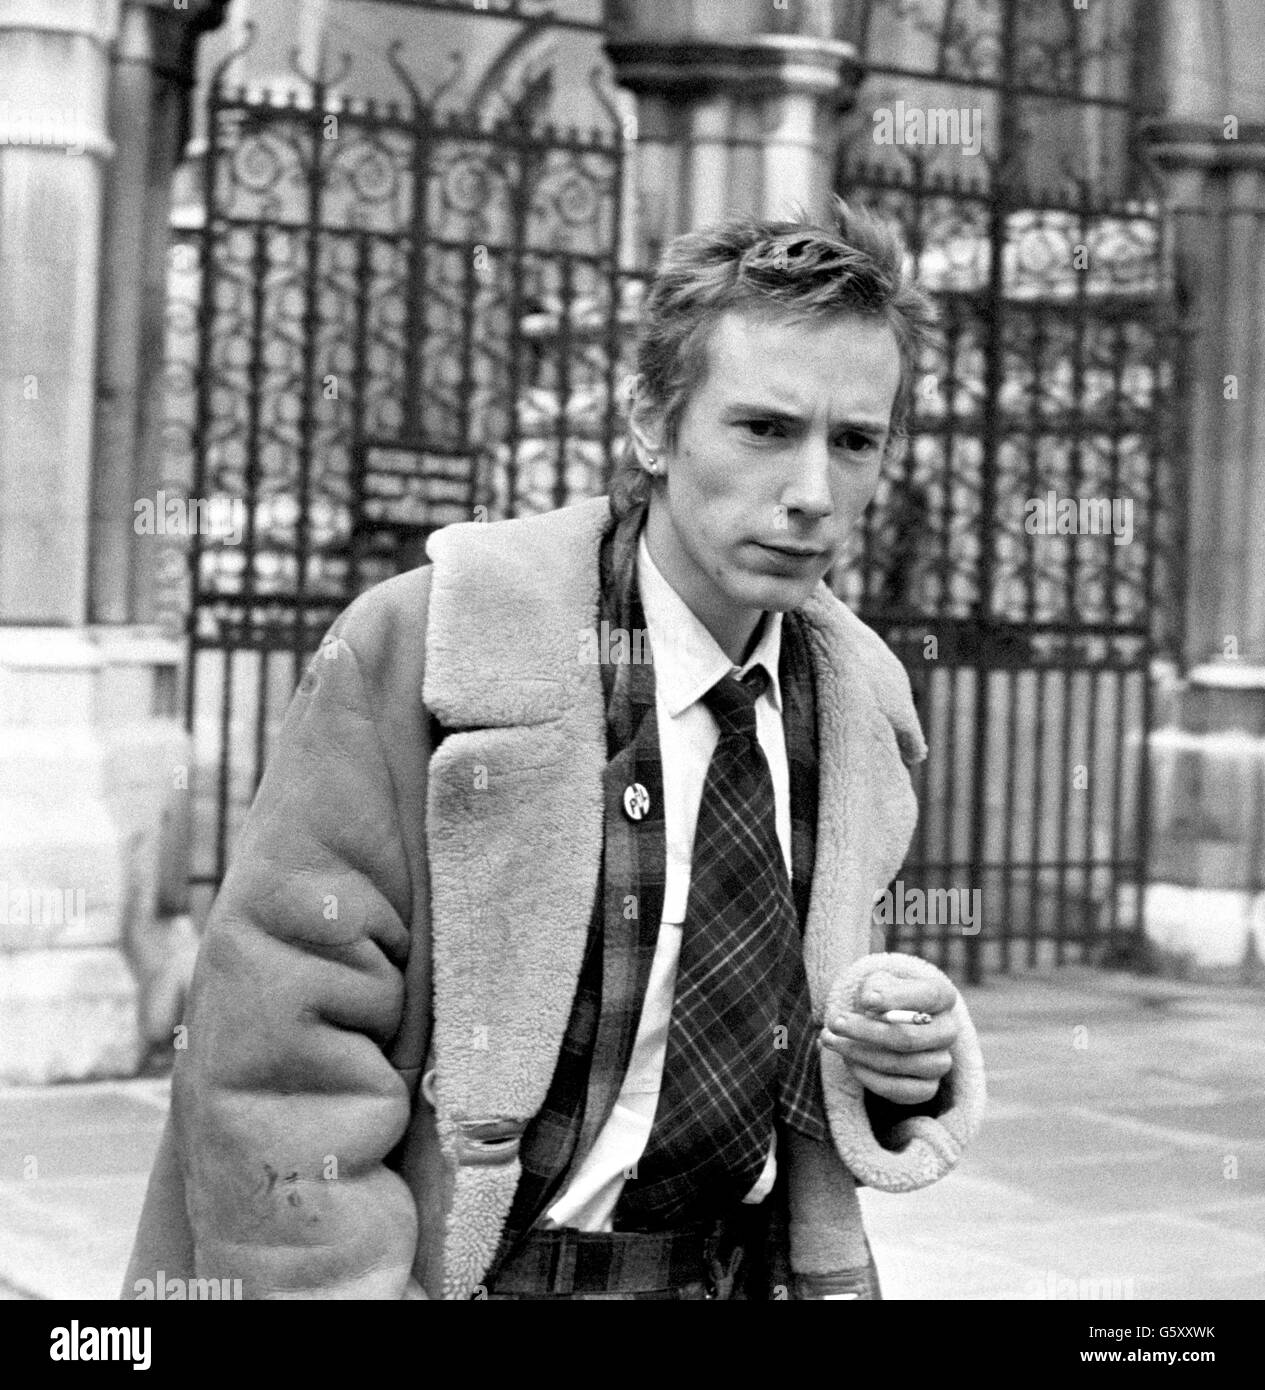 Music - Johnny Rotten at the High Court - 1979 Stock Photo